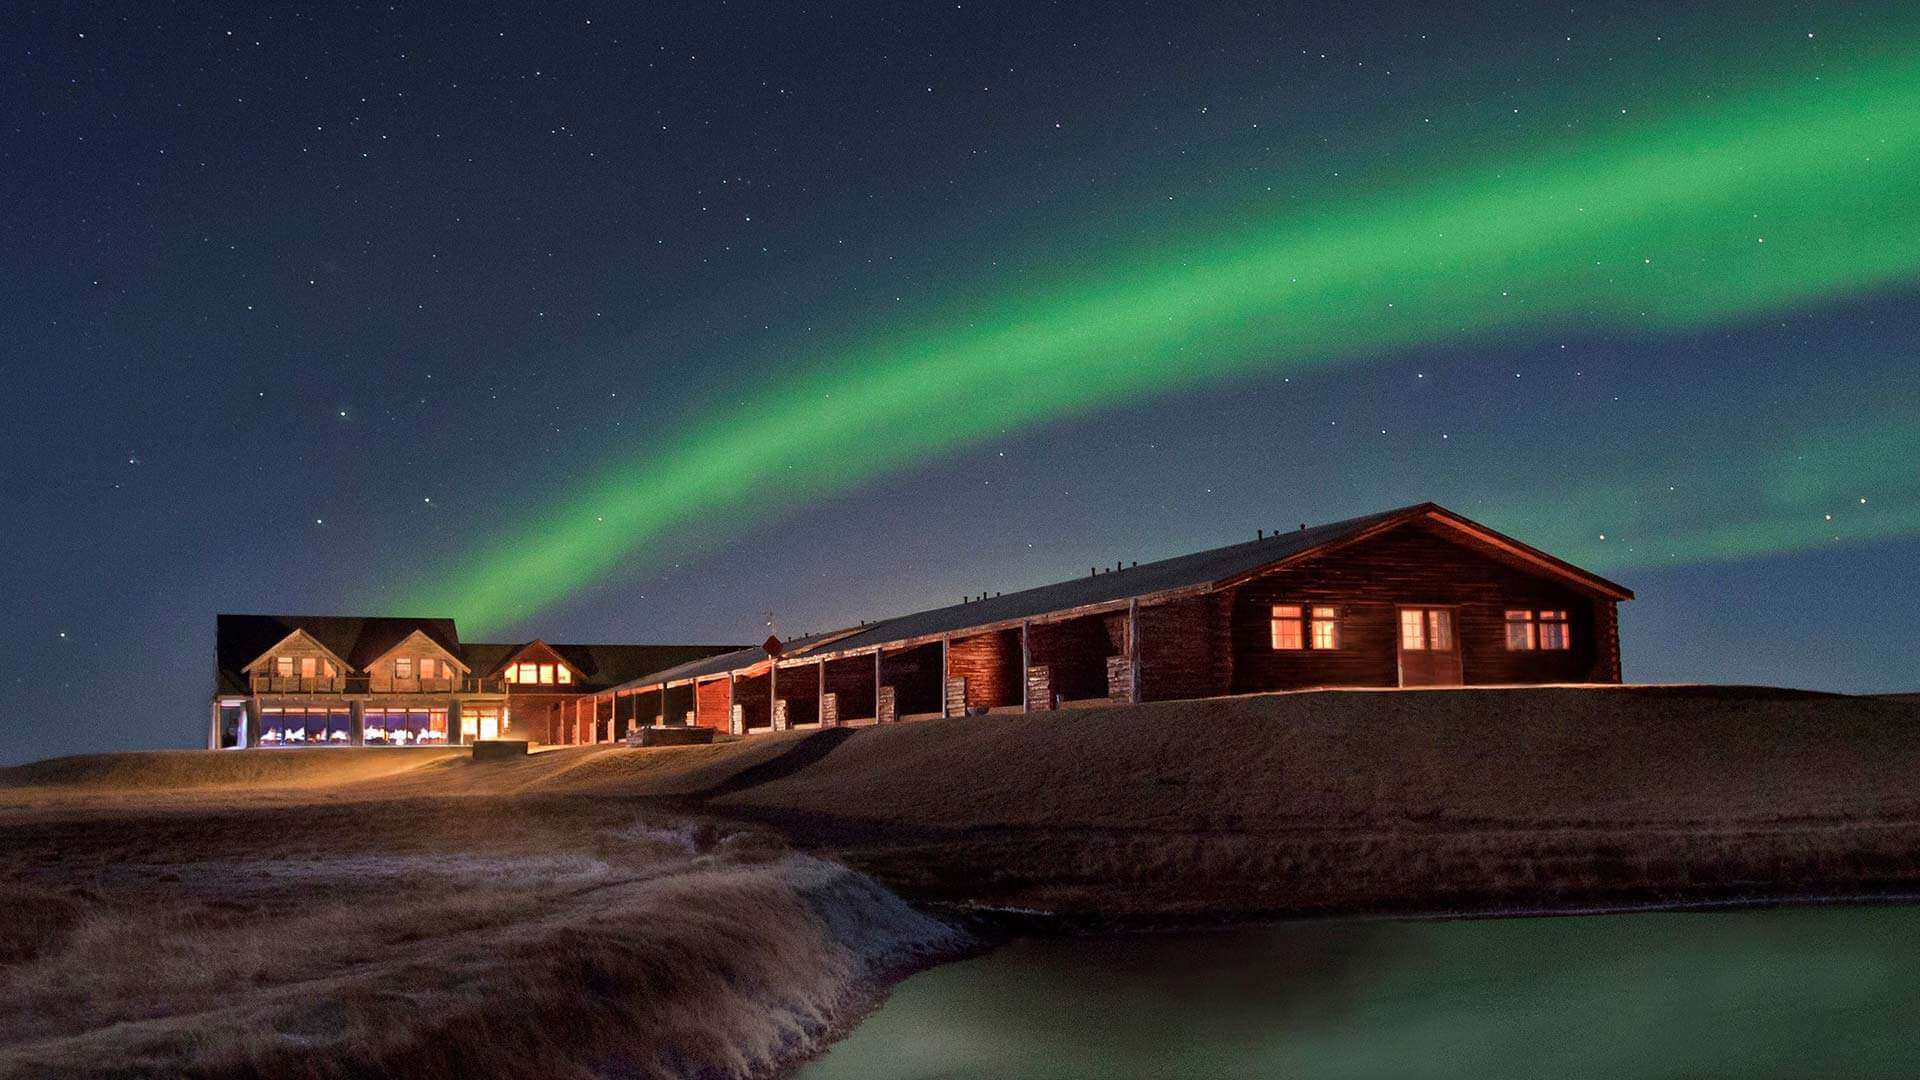 Hotel Rangá, a wooden lodge style building over which there are stars and green northern lights.